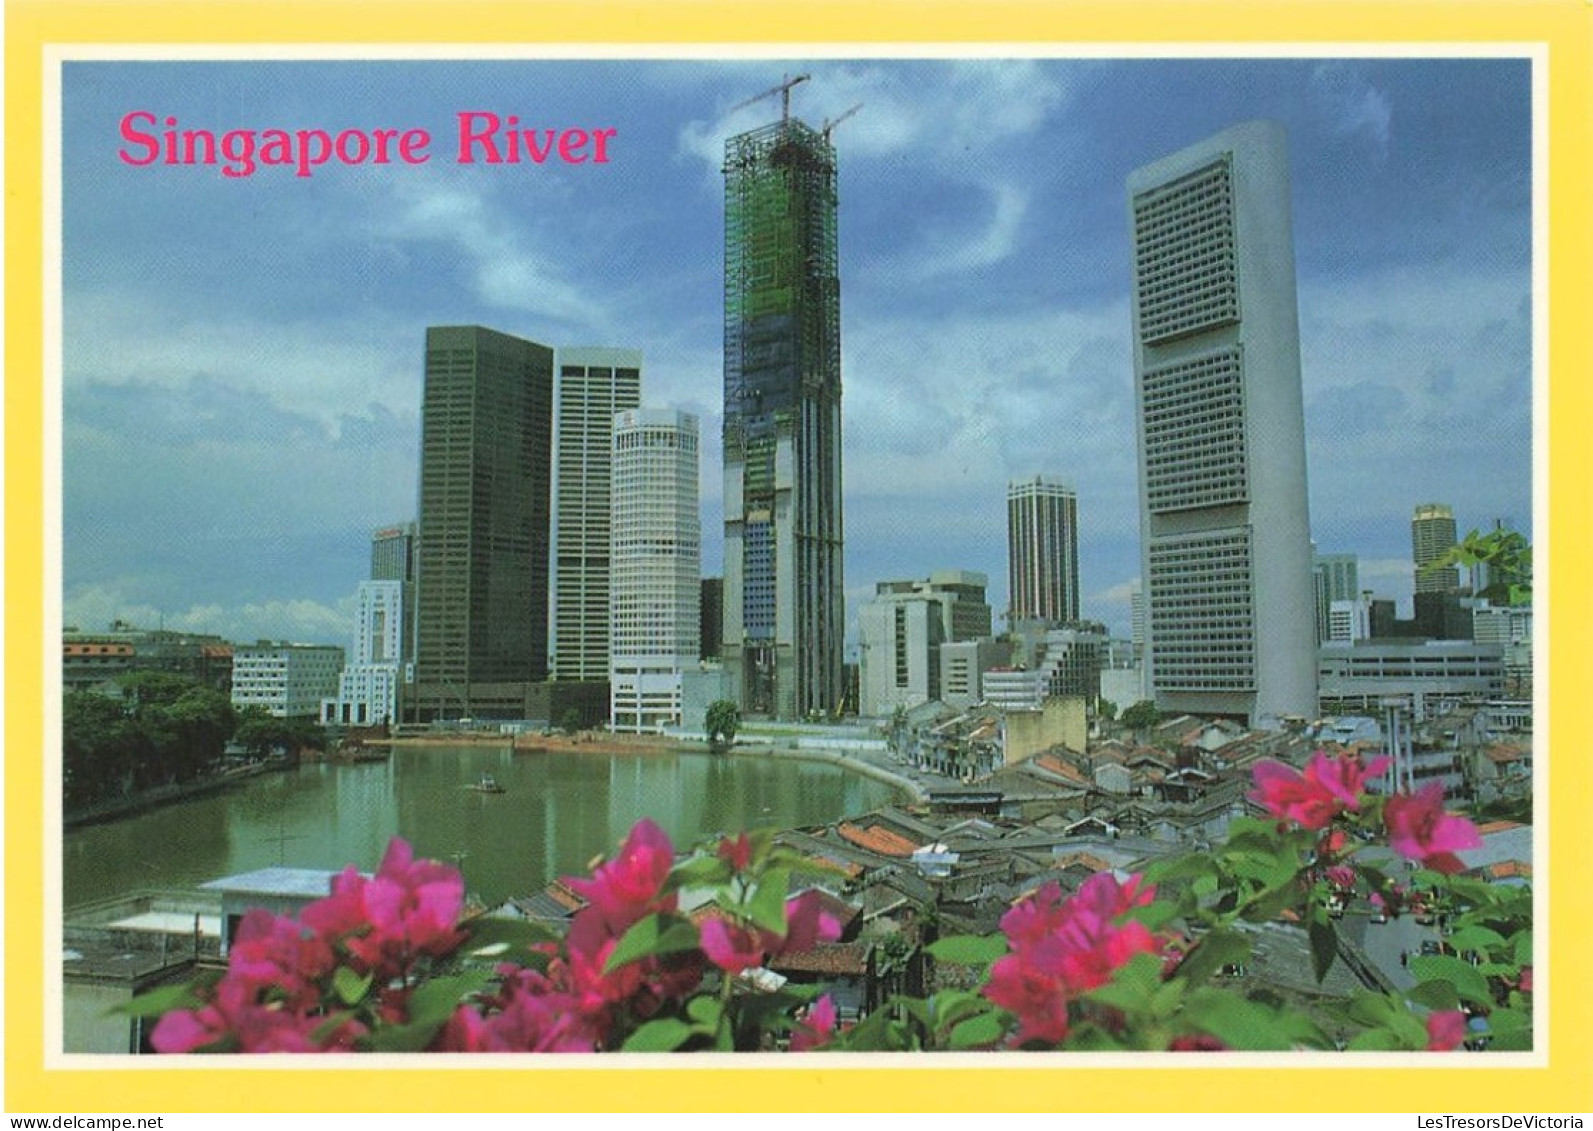 SINGAPOUR - Picturesque View Of Towering Skyscrapers And Old Buildings Alongside The Singapore River - Carte Postale - Singapore